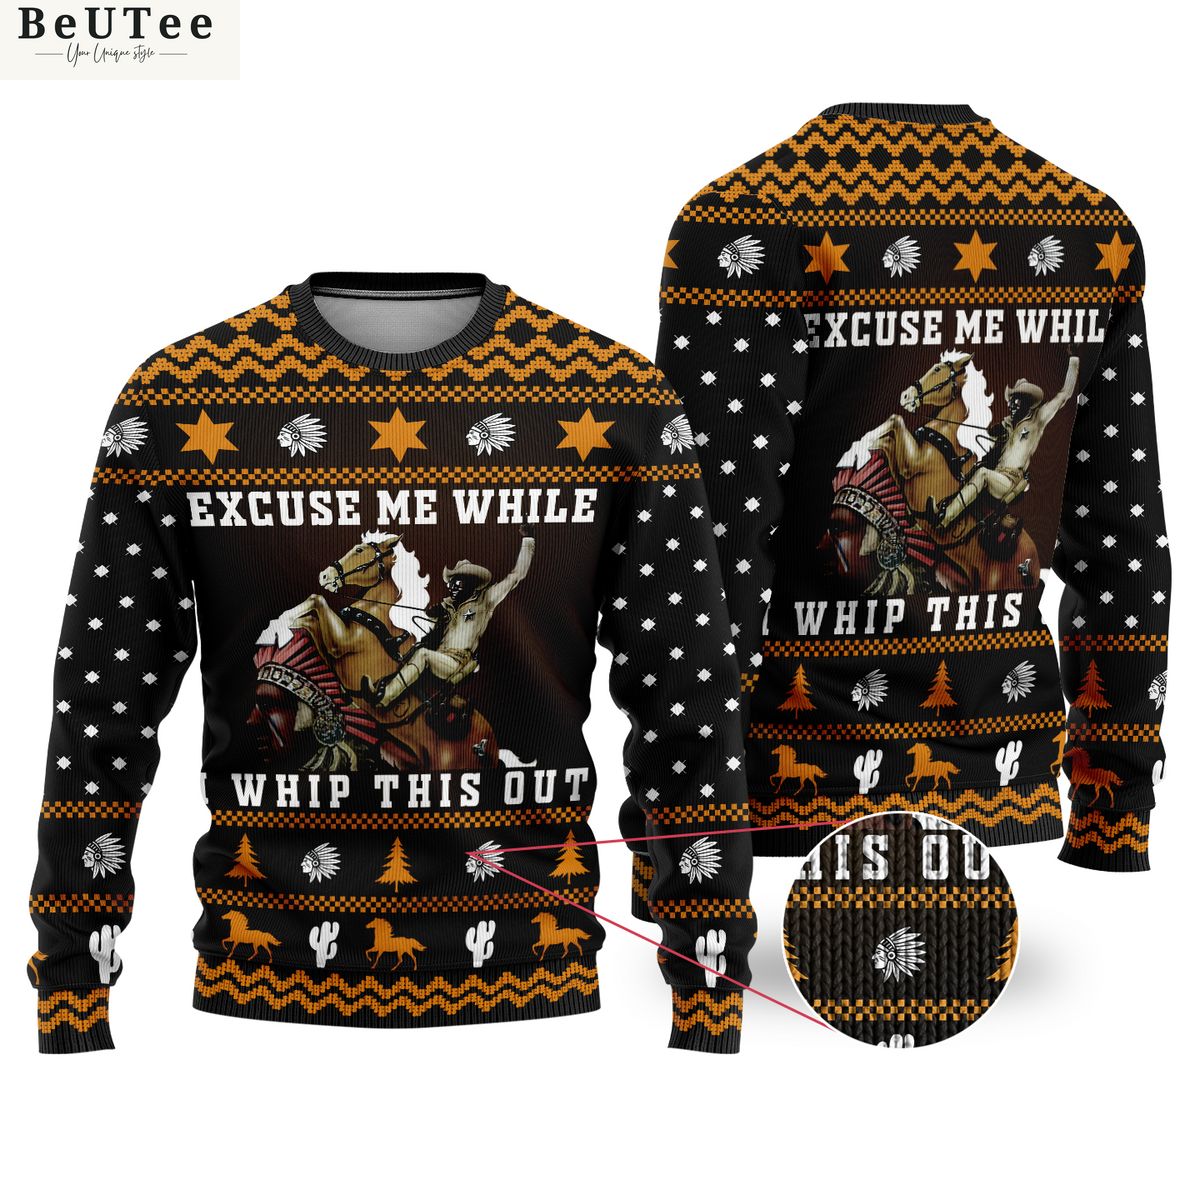 blazing saddles excuse me while i whip this out ugly sweater jumper 1 AaR4m.jpg